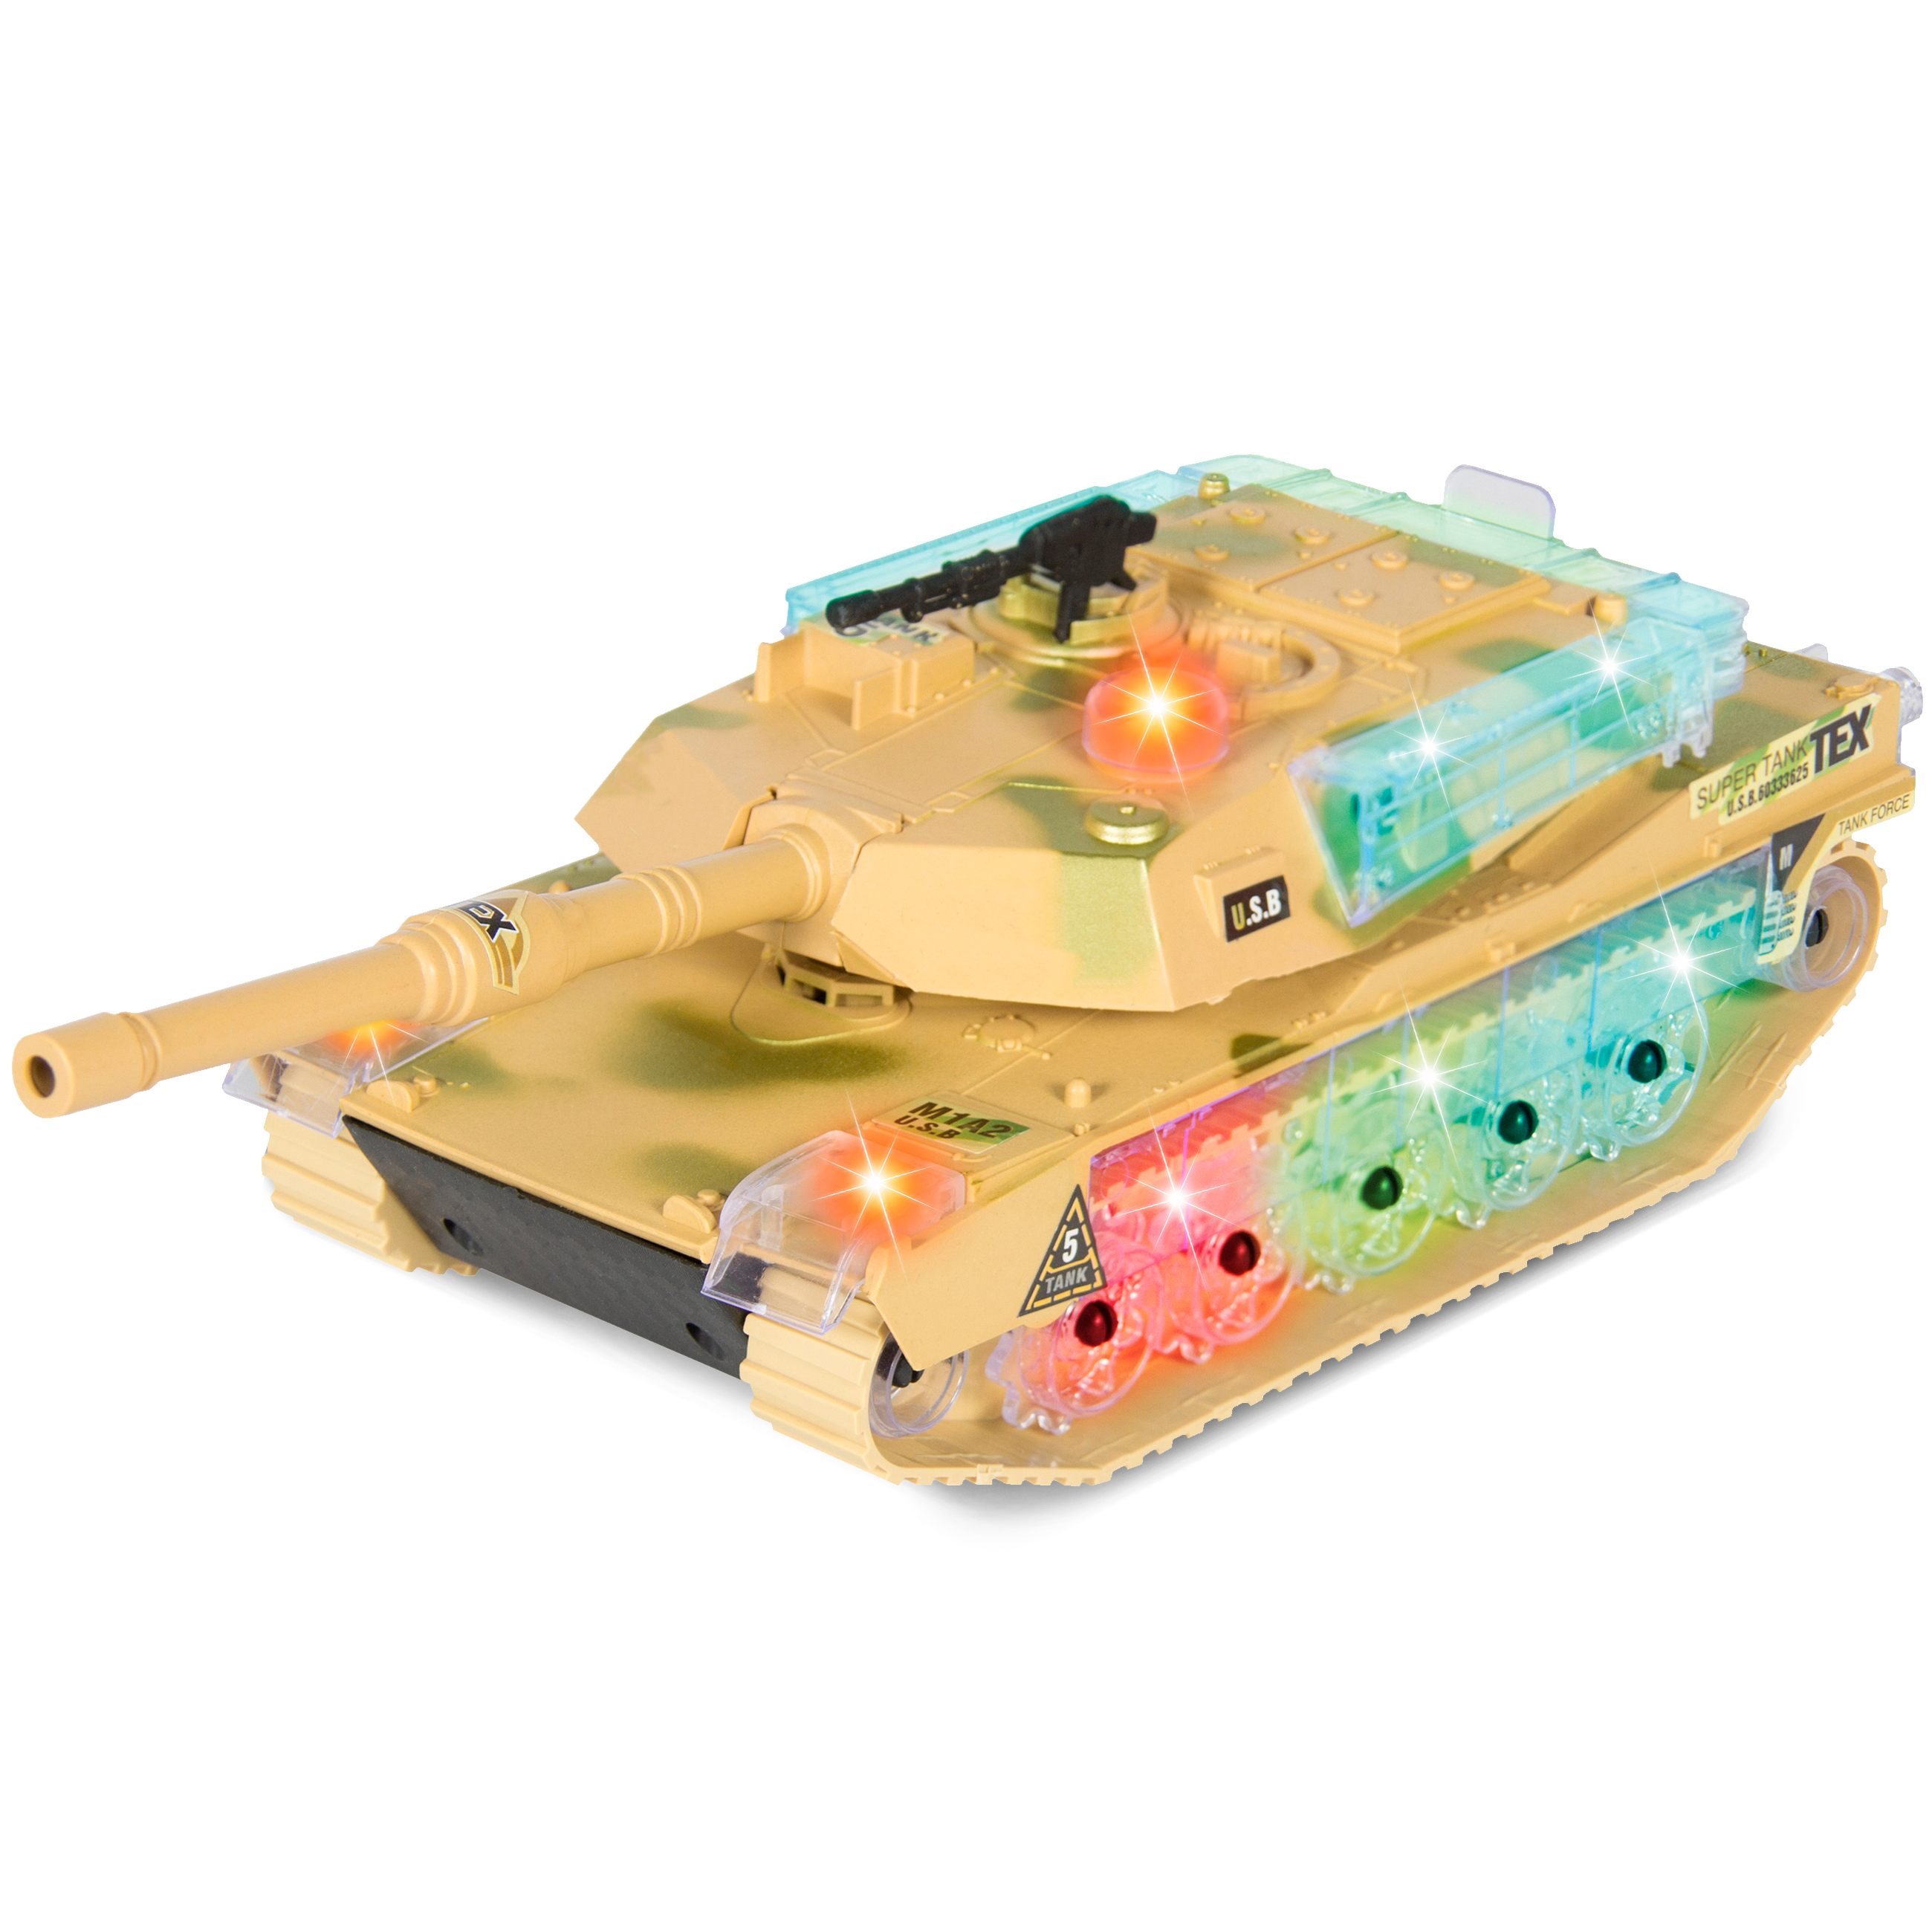 Best Choice Products Kids Military Army Tank Toy w/ Flashing Lights and Sound, Bump and Go Action - Beige - image 1 of 5